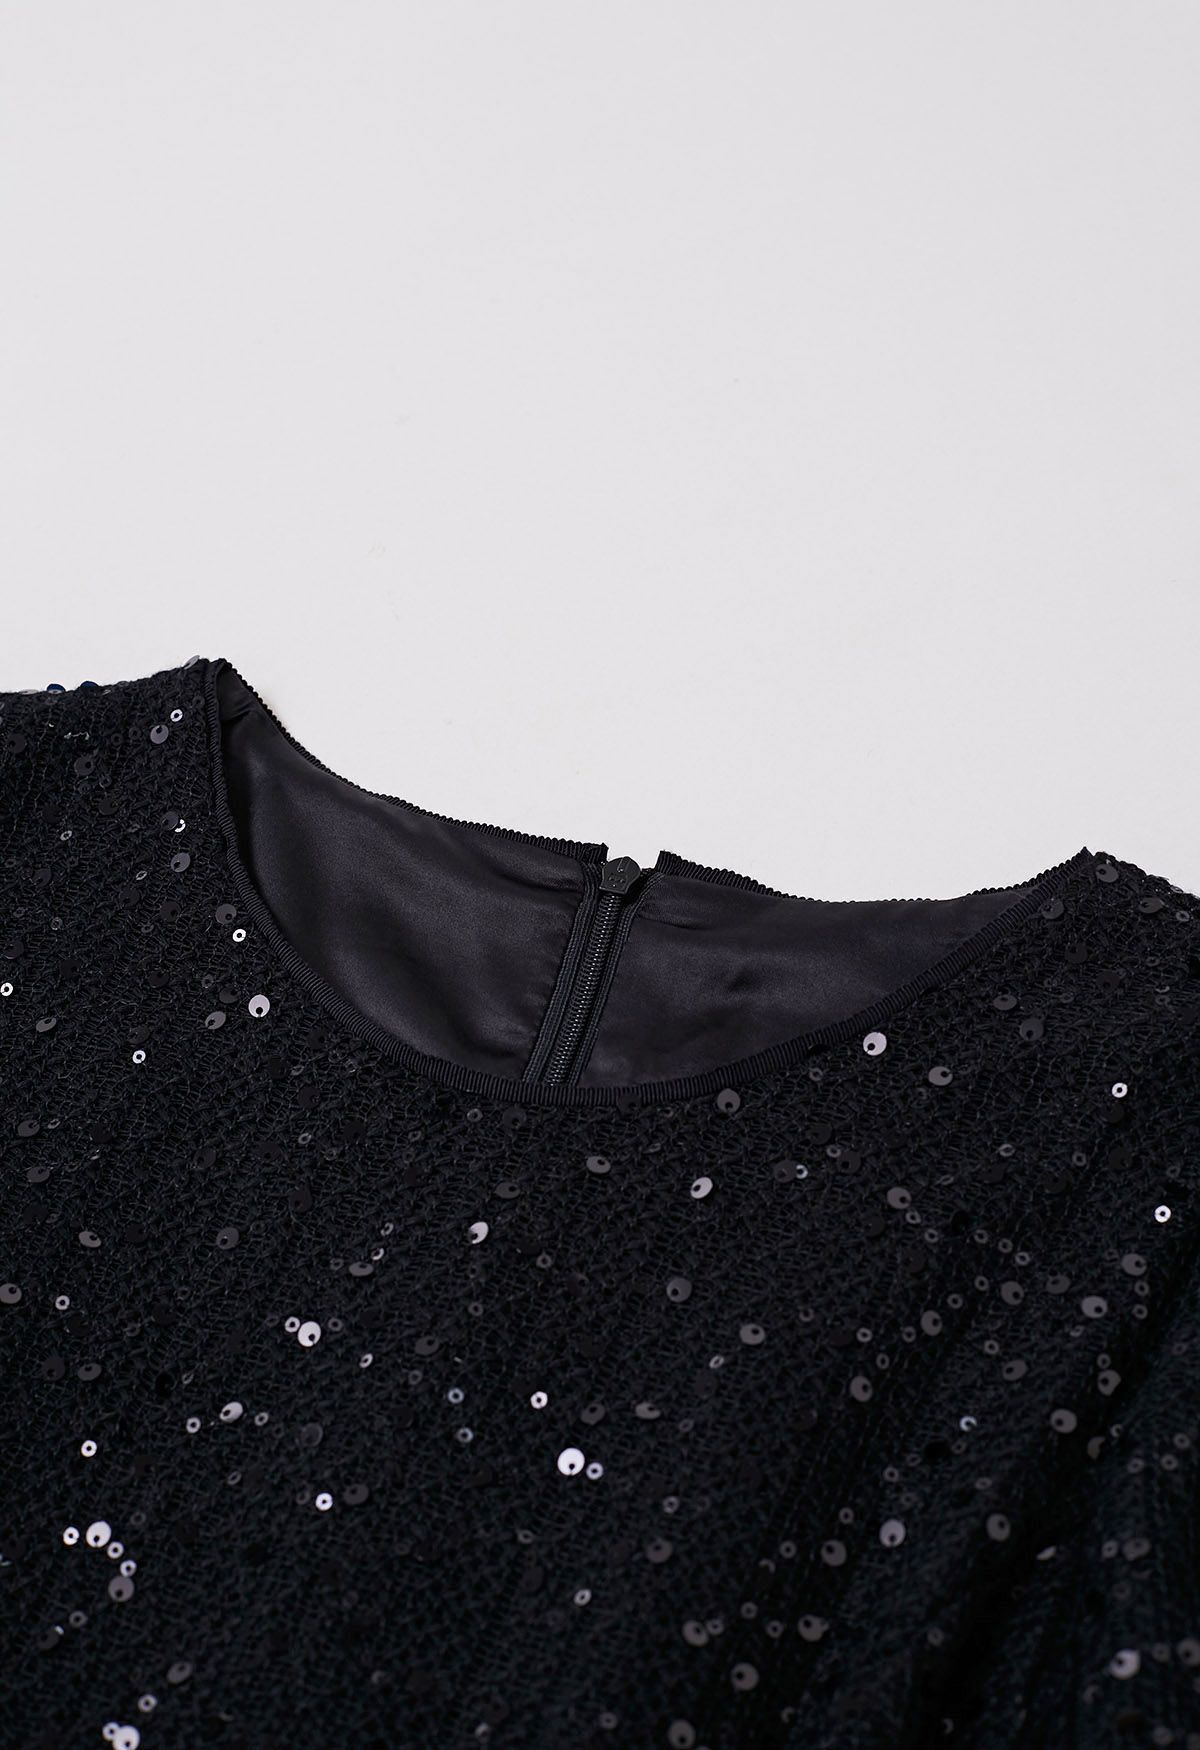 Glitter Sequin Frilling Dress with Choker in Black